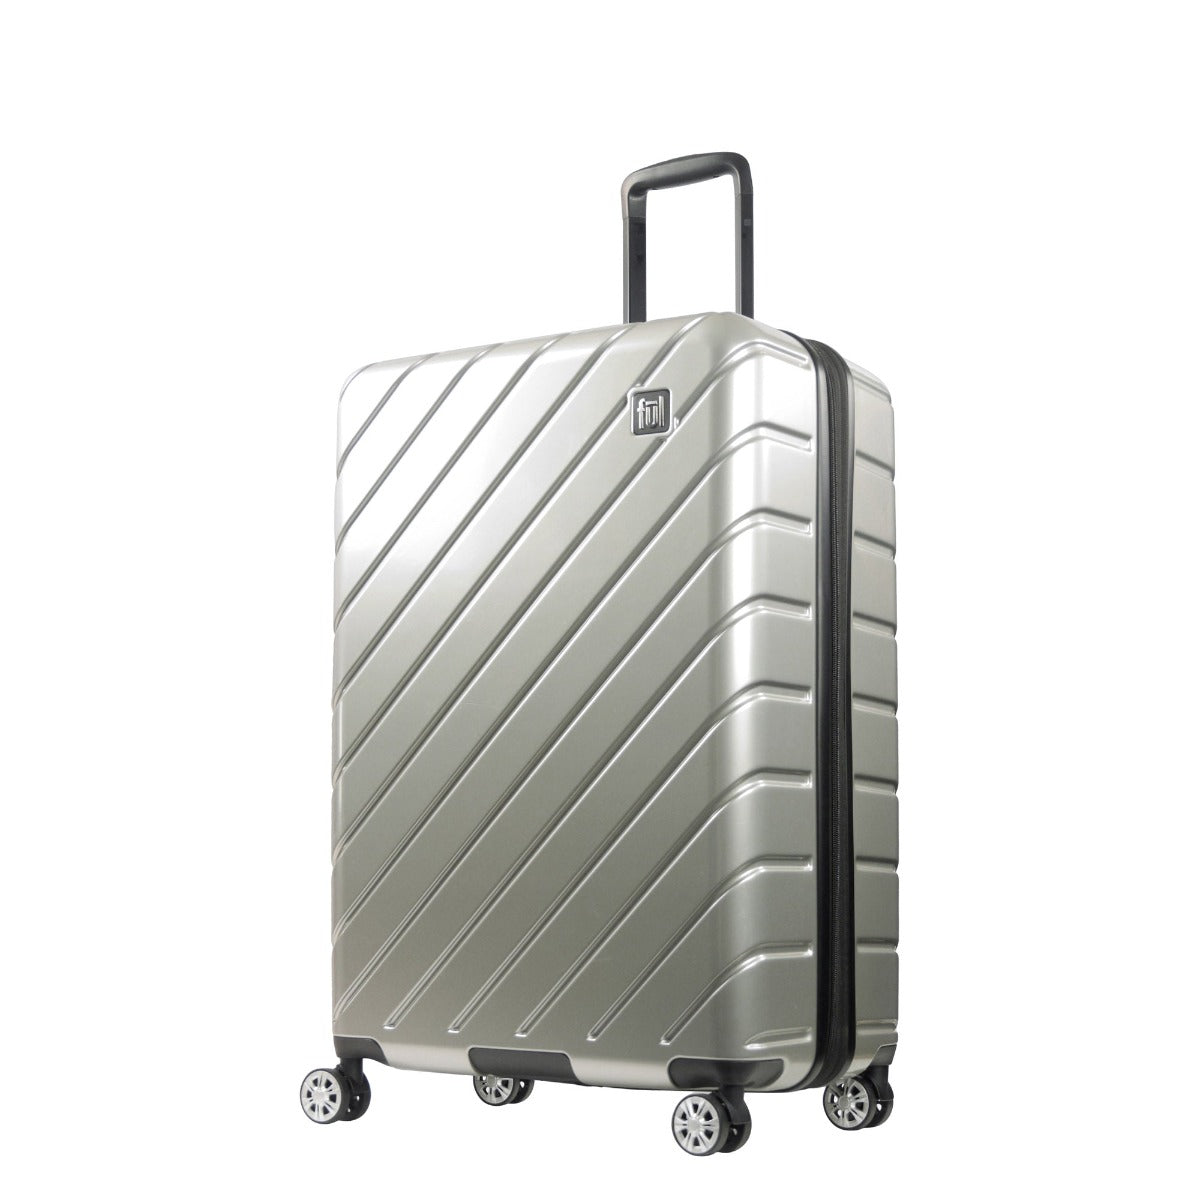 Velocity 31" Hardside Spinner Suitcase Checked Luggage Suitcase Silver